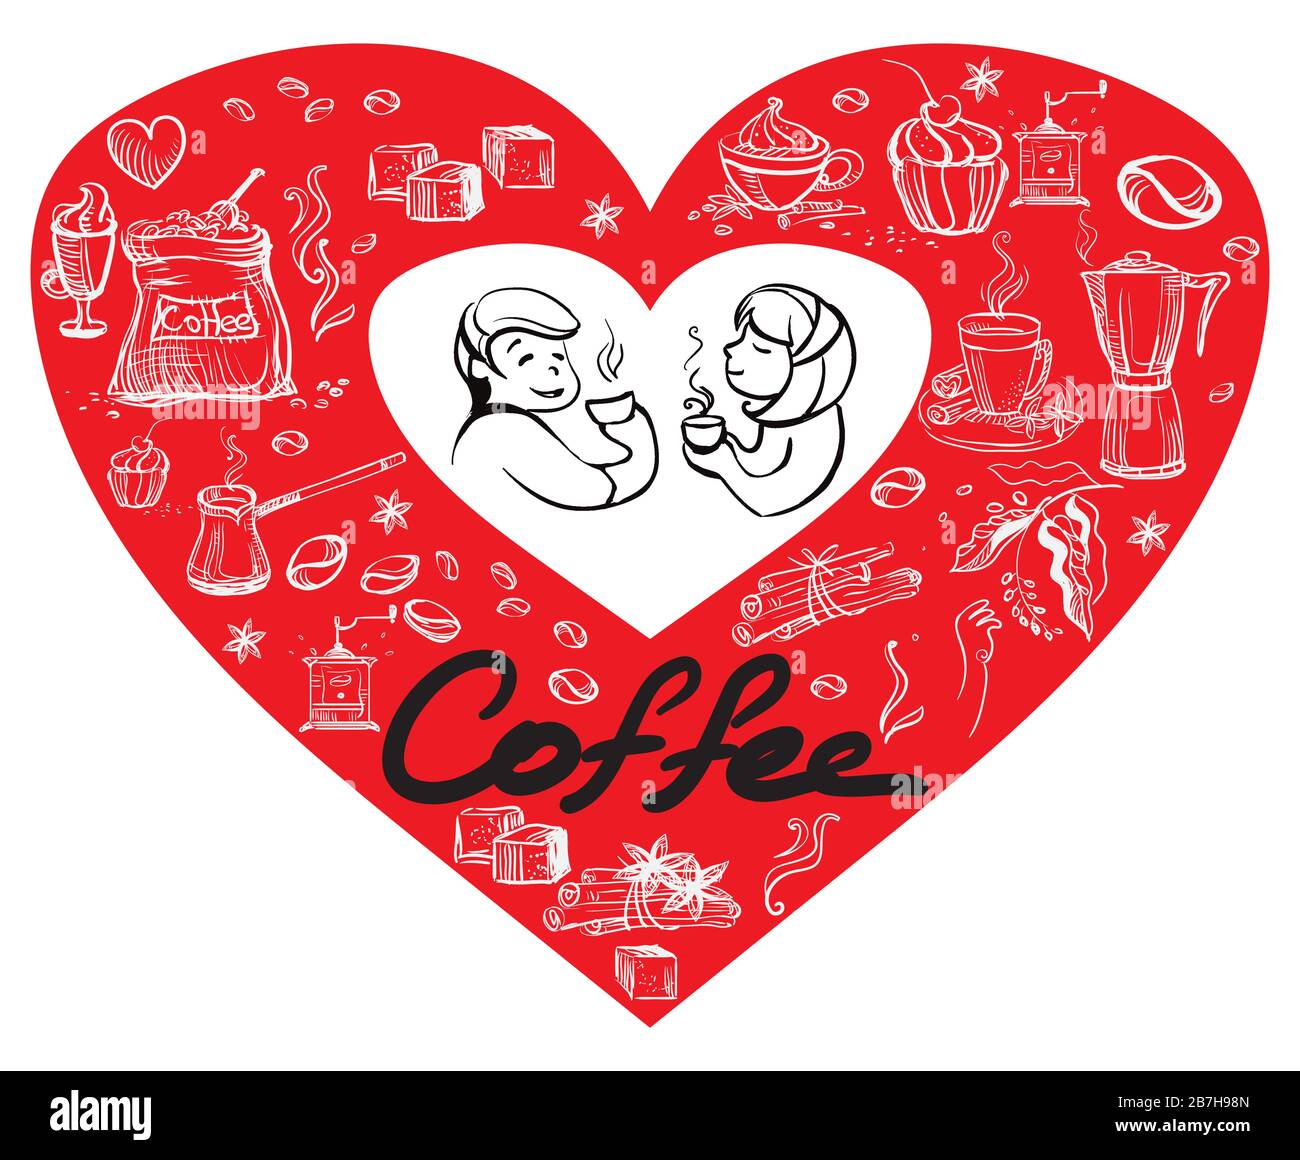 Hand drawing vector doodle style coffee theme. Young girl and boy drinking coffee inside a heart with coffee icons isolated on white background. Food Stock Vector